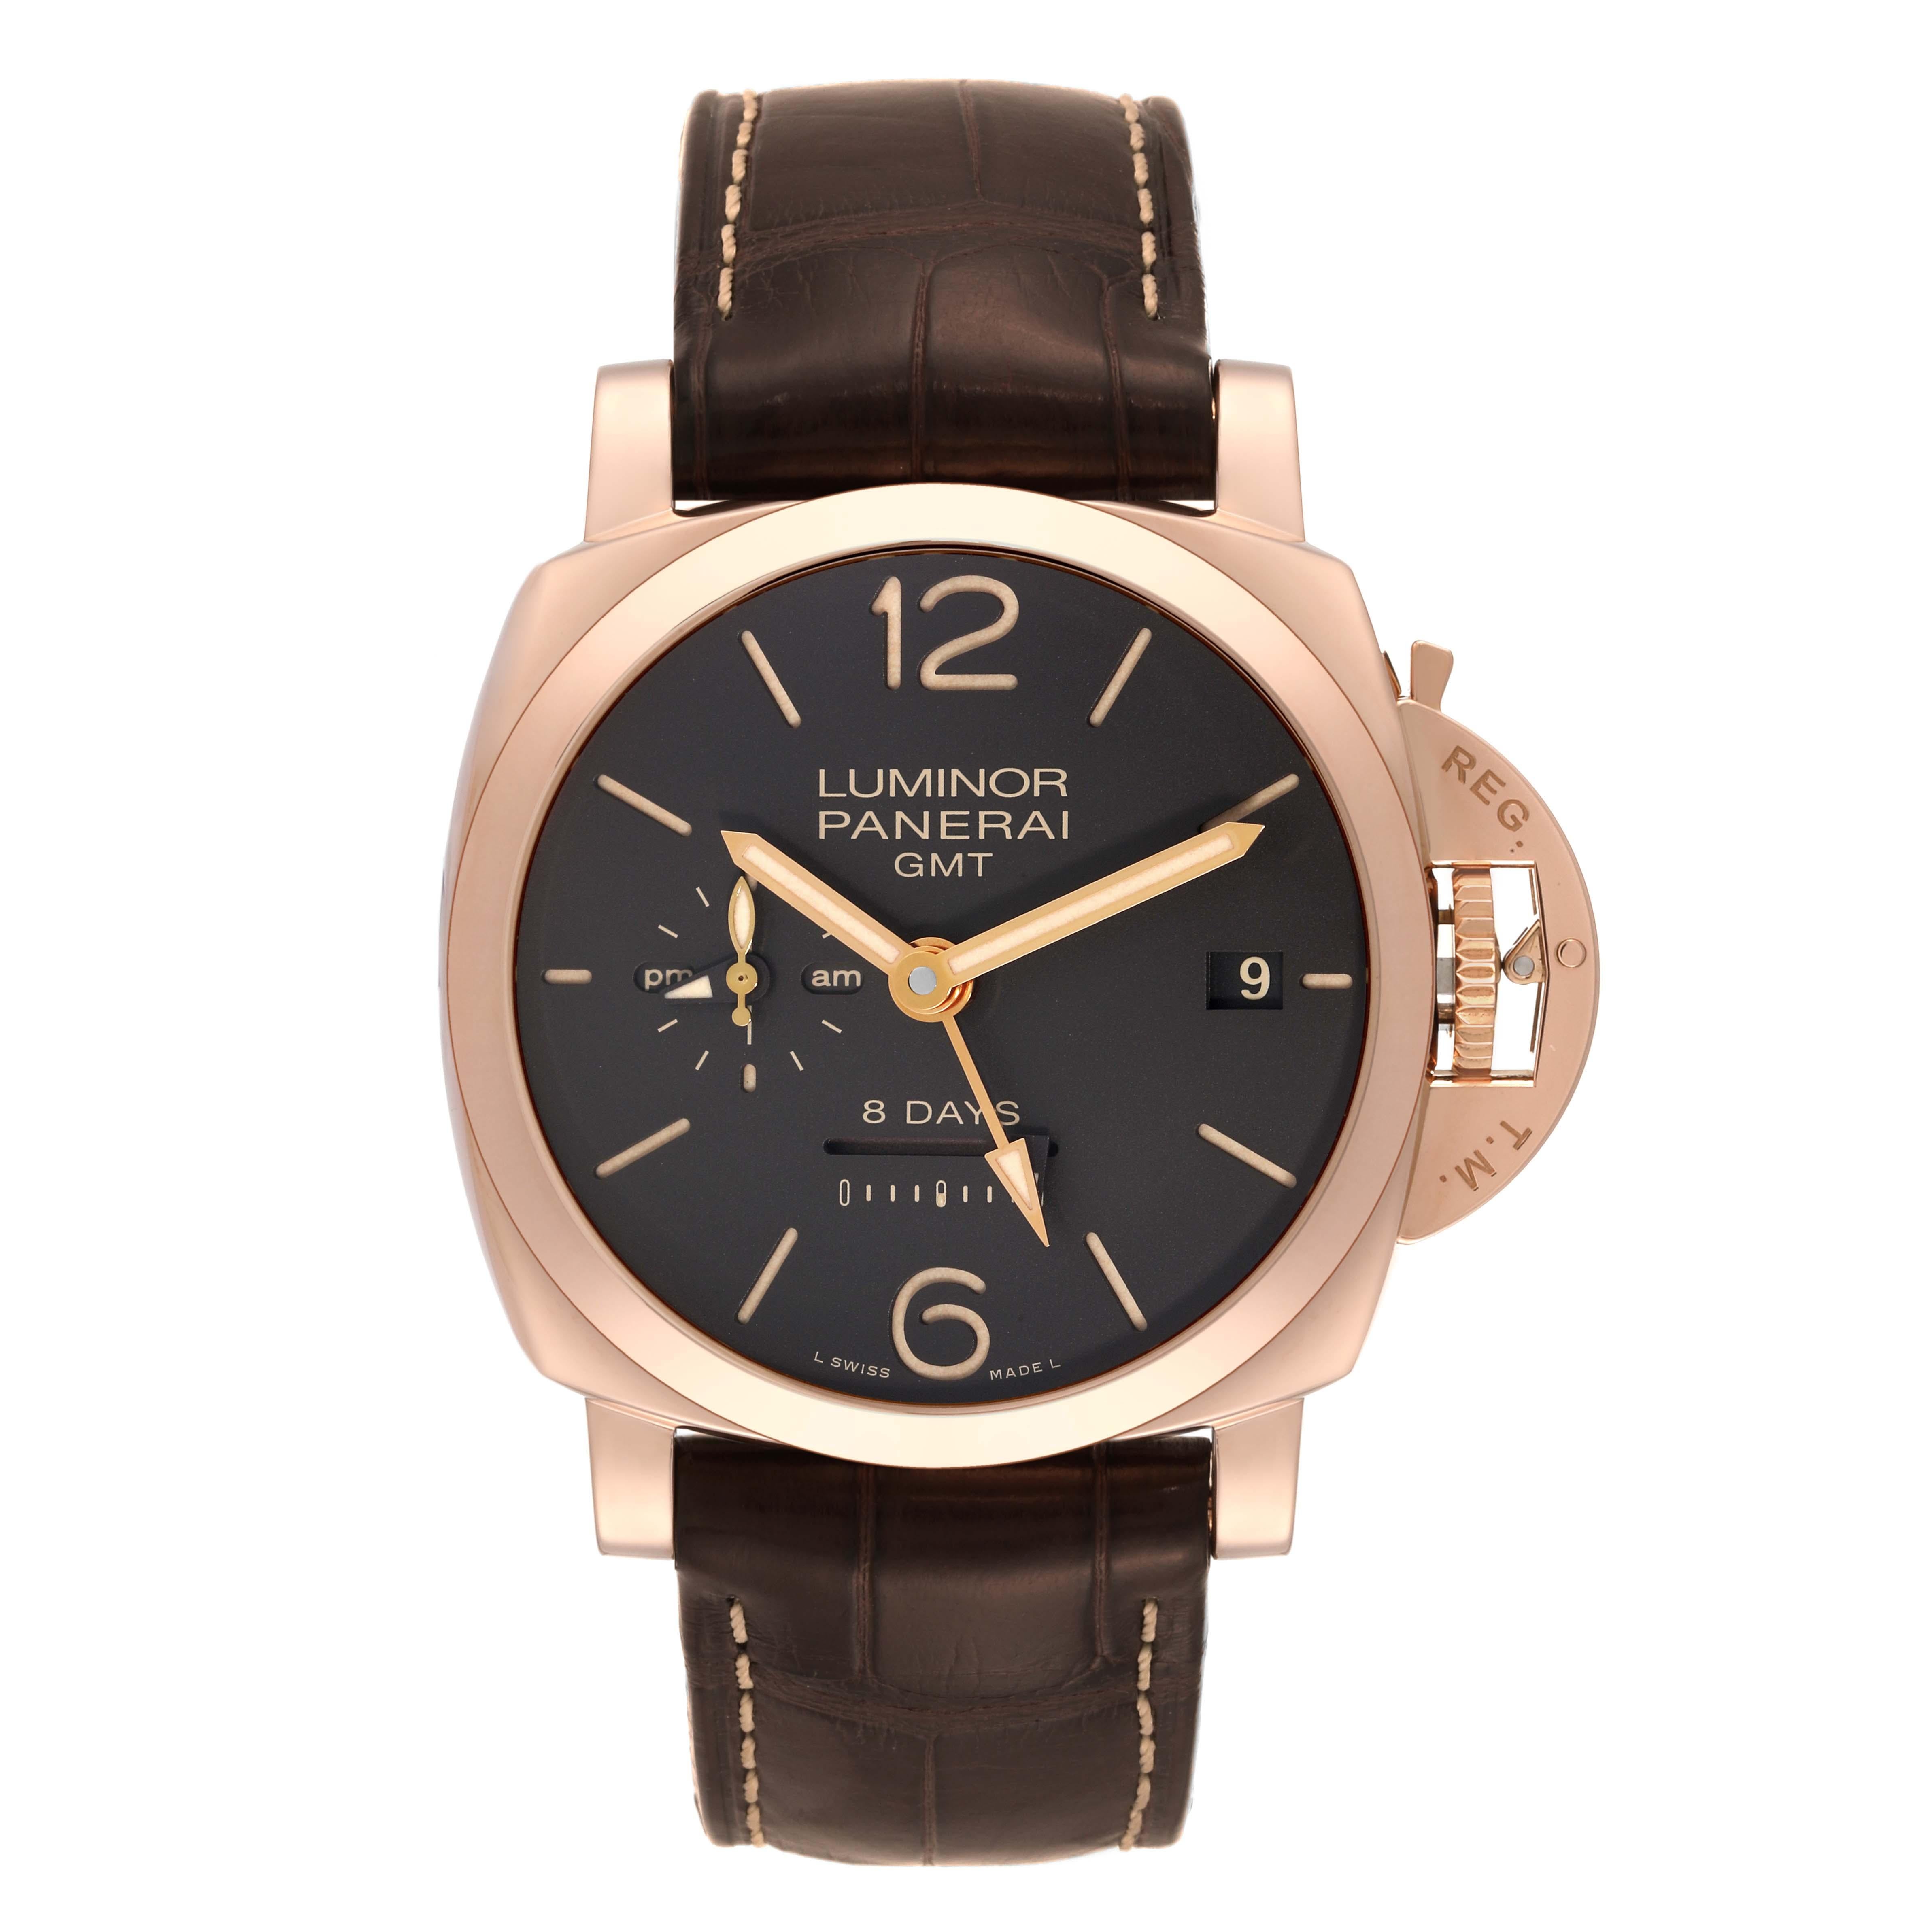 Panerai Luminor 1950 8 Days GMT Rose Gold Mens Watch PAM00576 Papers. Manual-winding movement. Glucydur balance, 28,800 alternations/hour. KIF Parechoc anti-shock device. 8-day power reserve with linear indicator, three barrels. 18k rose gold